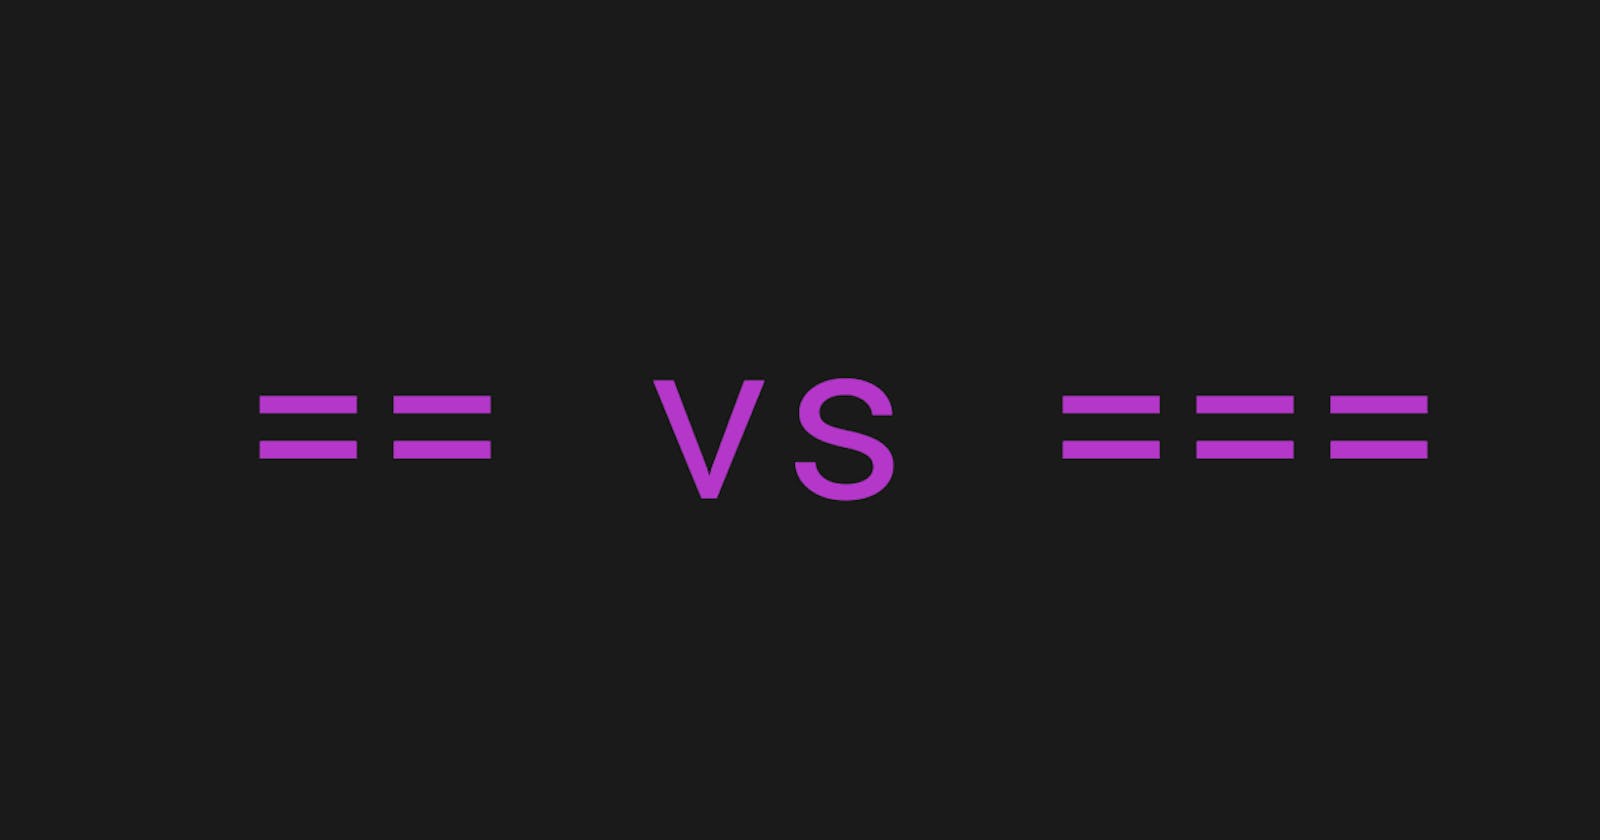 Difference Between "==" and "===" in JavaScript